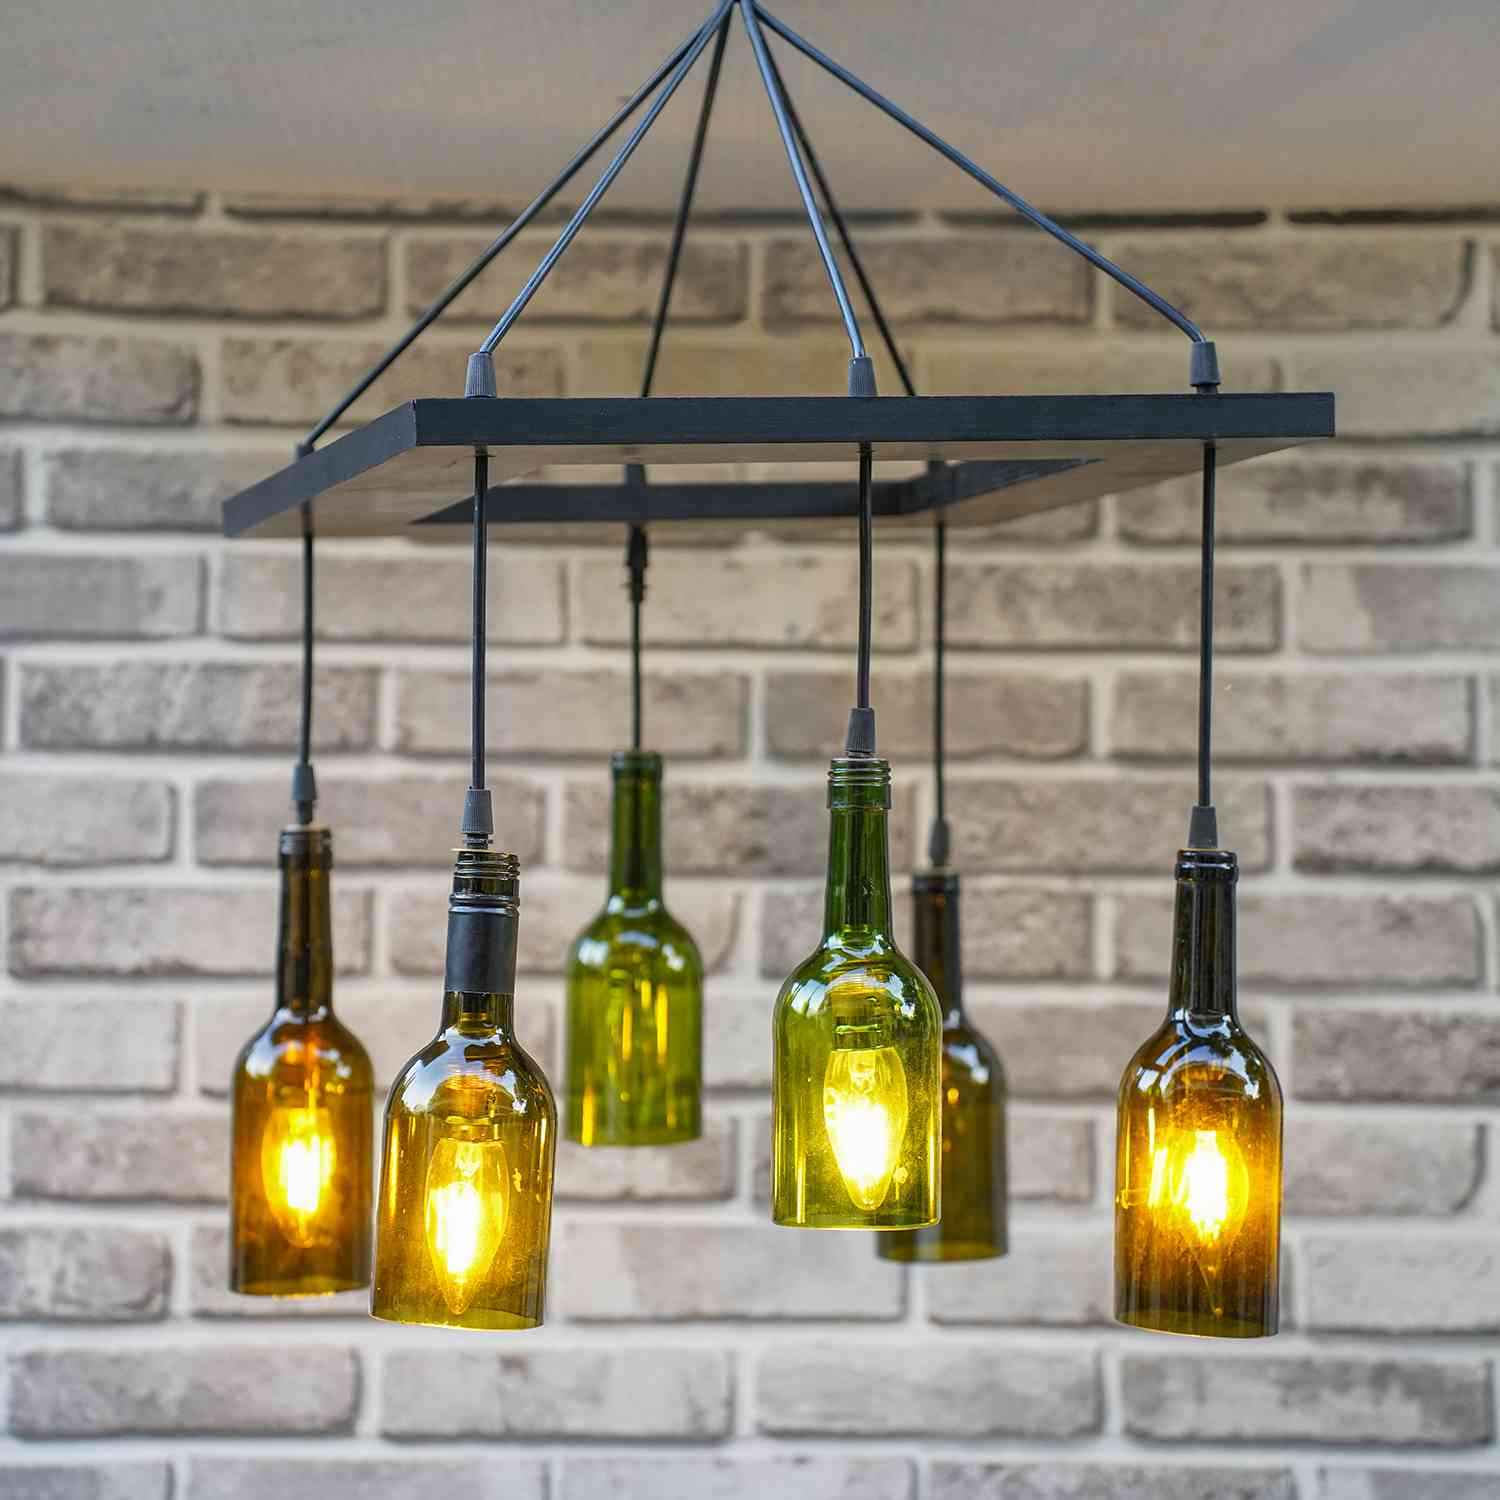 Top Solid Wall Mount Lamp (Recycled Bottle)